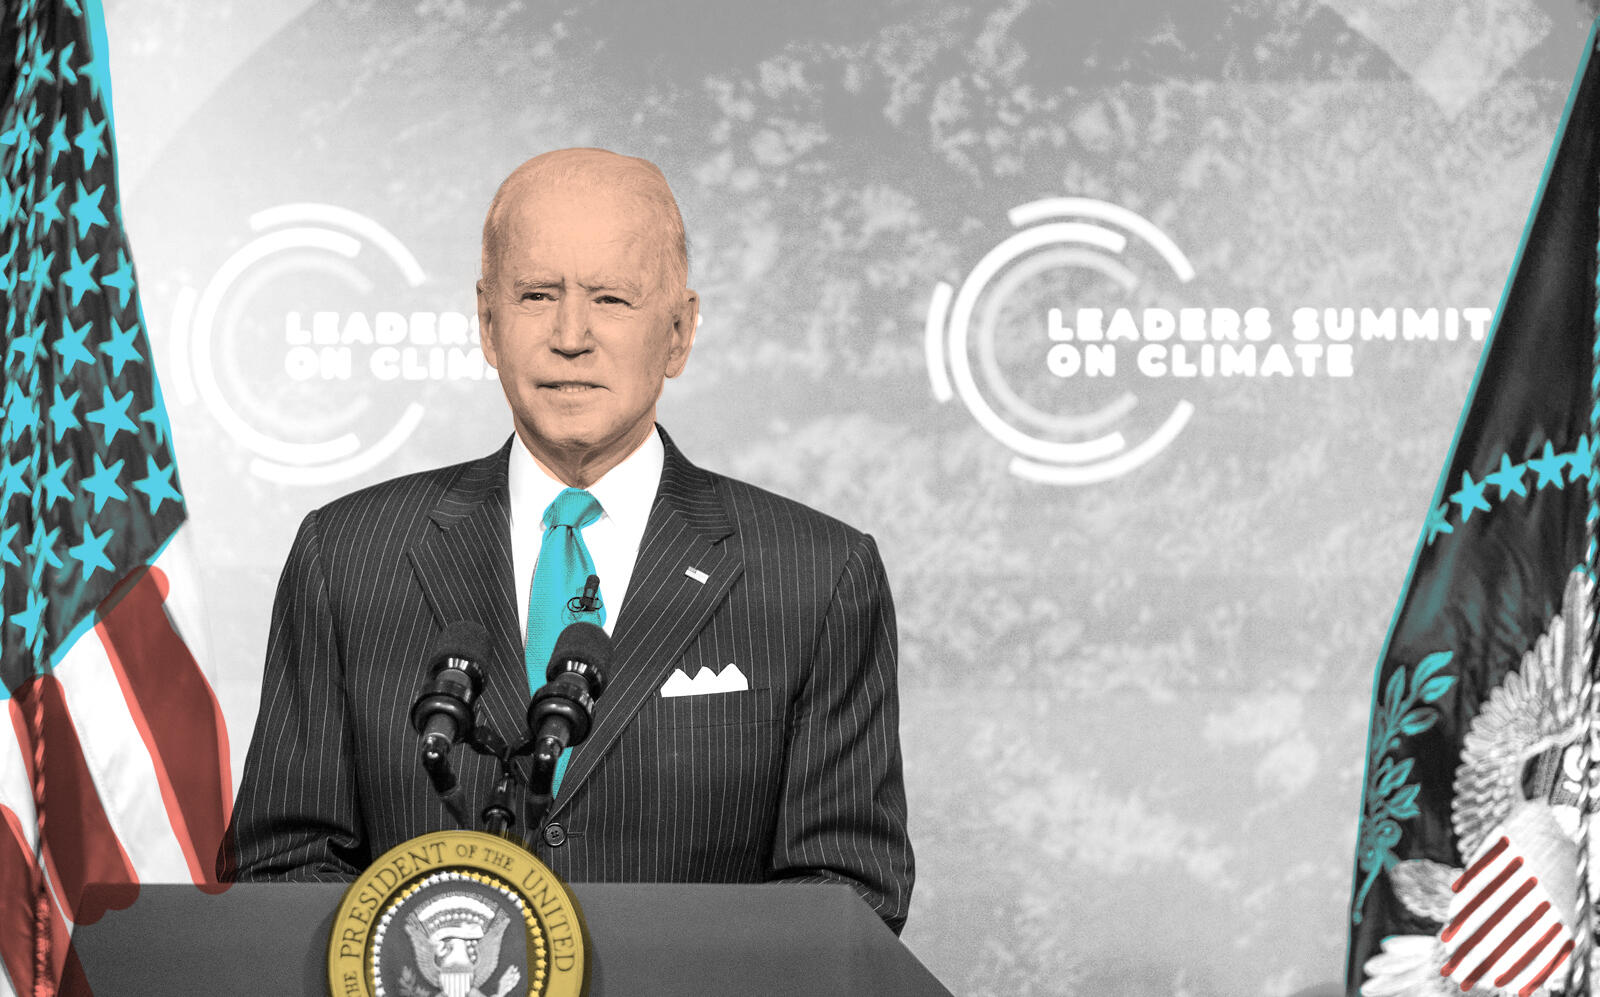 President Biden at the Leaders Summit On Climate. (Getty)